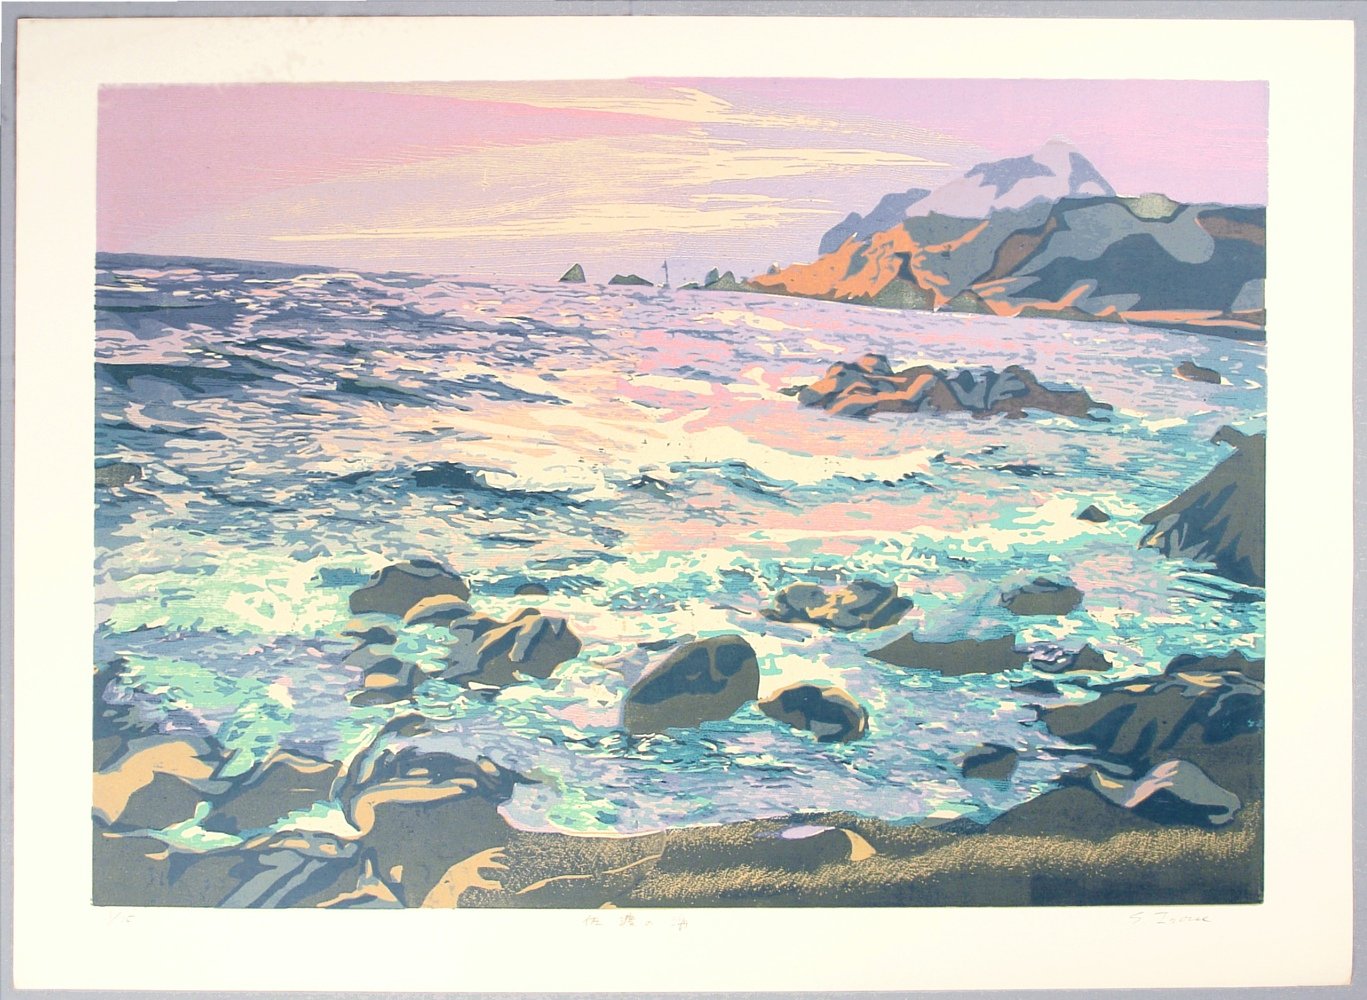 The Sea of Sado by Shigeko Inoue. A beach scene with a pink sky catching the water.